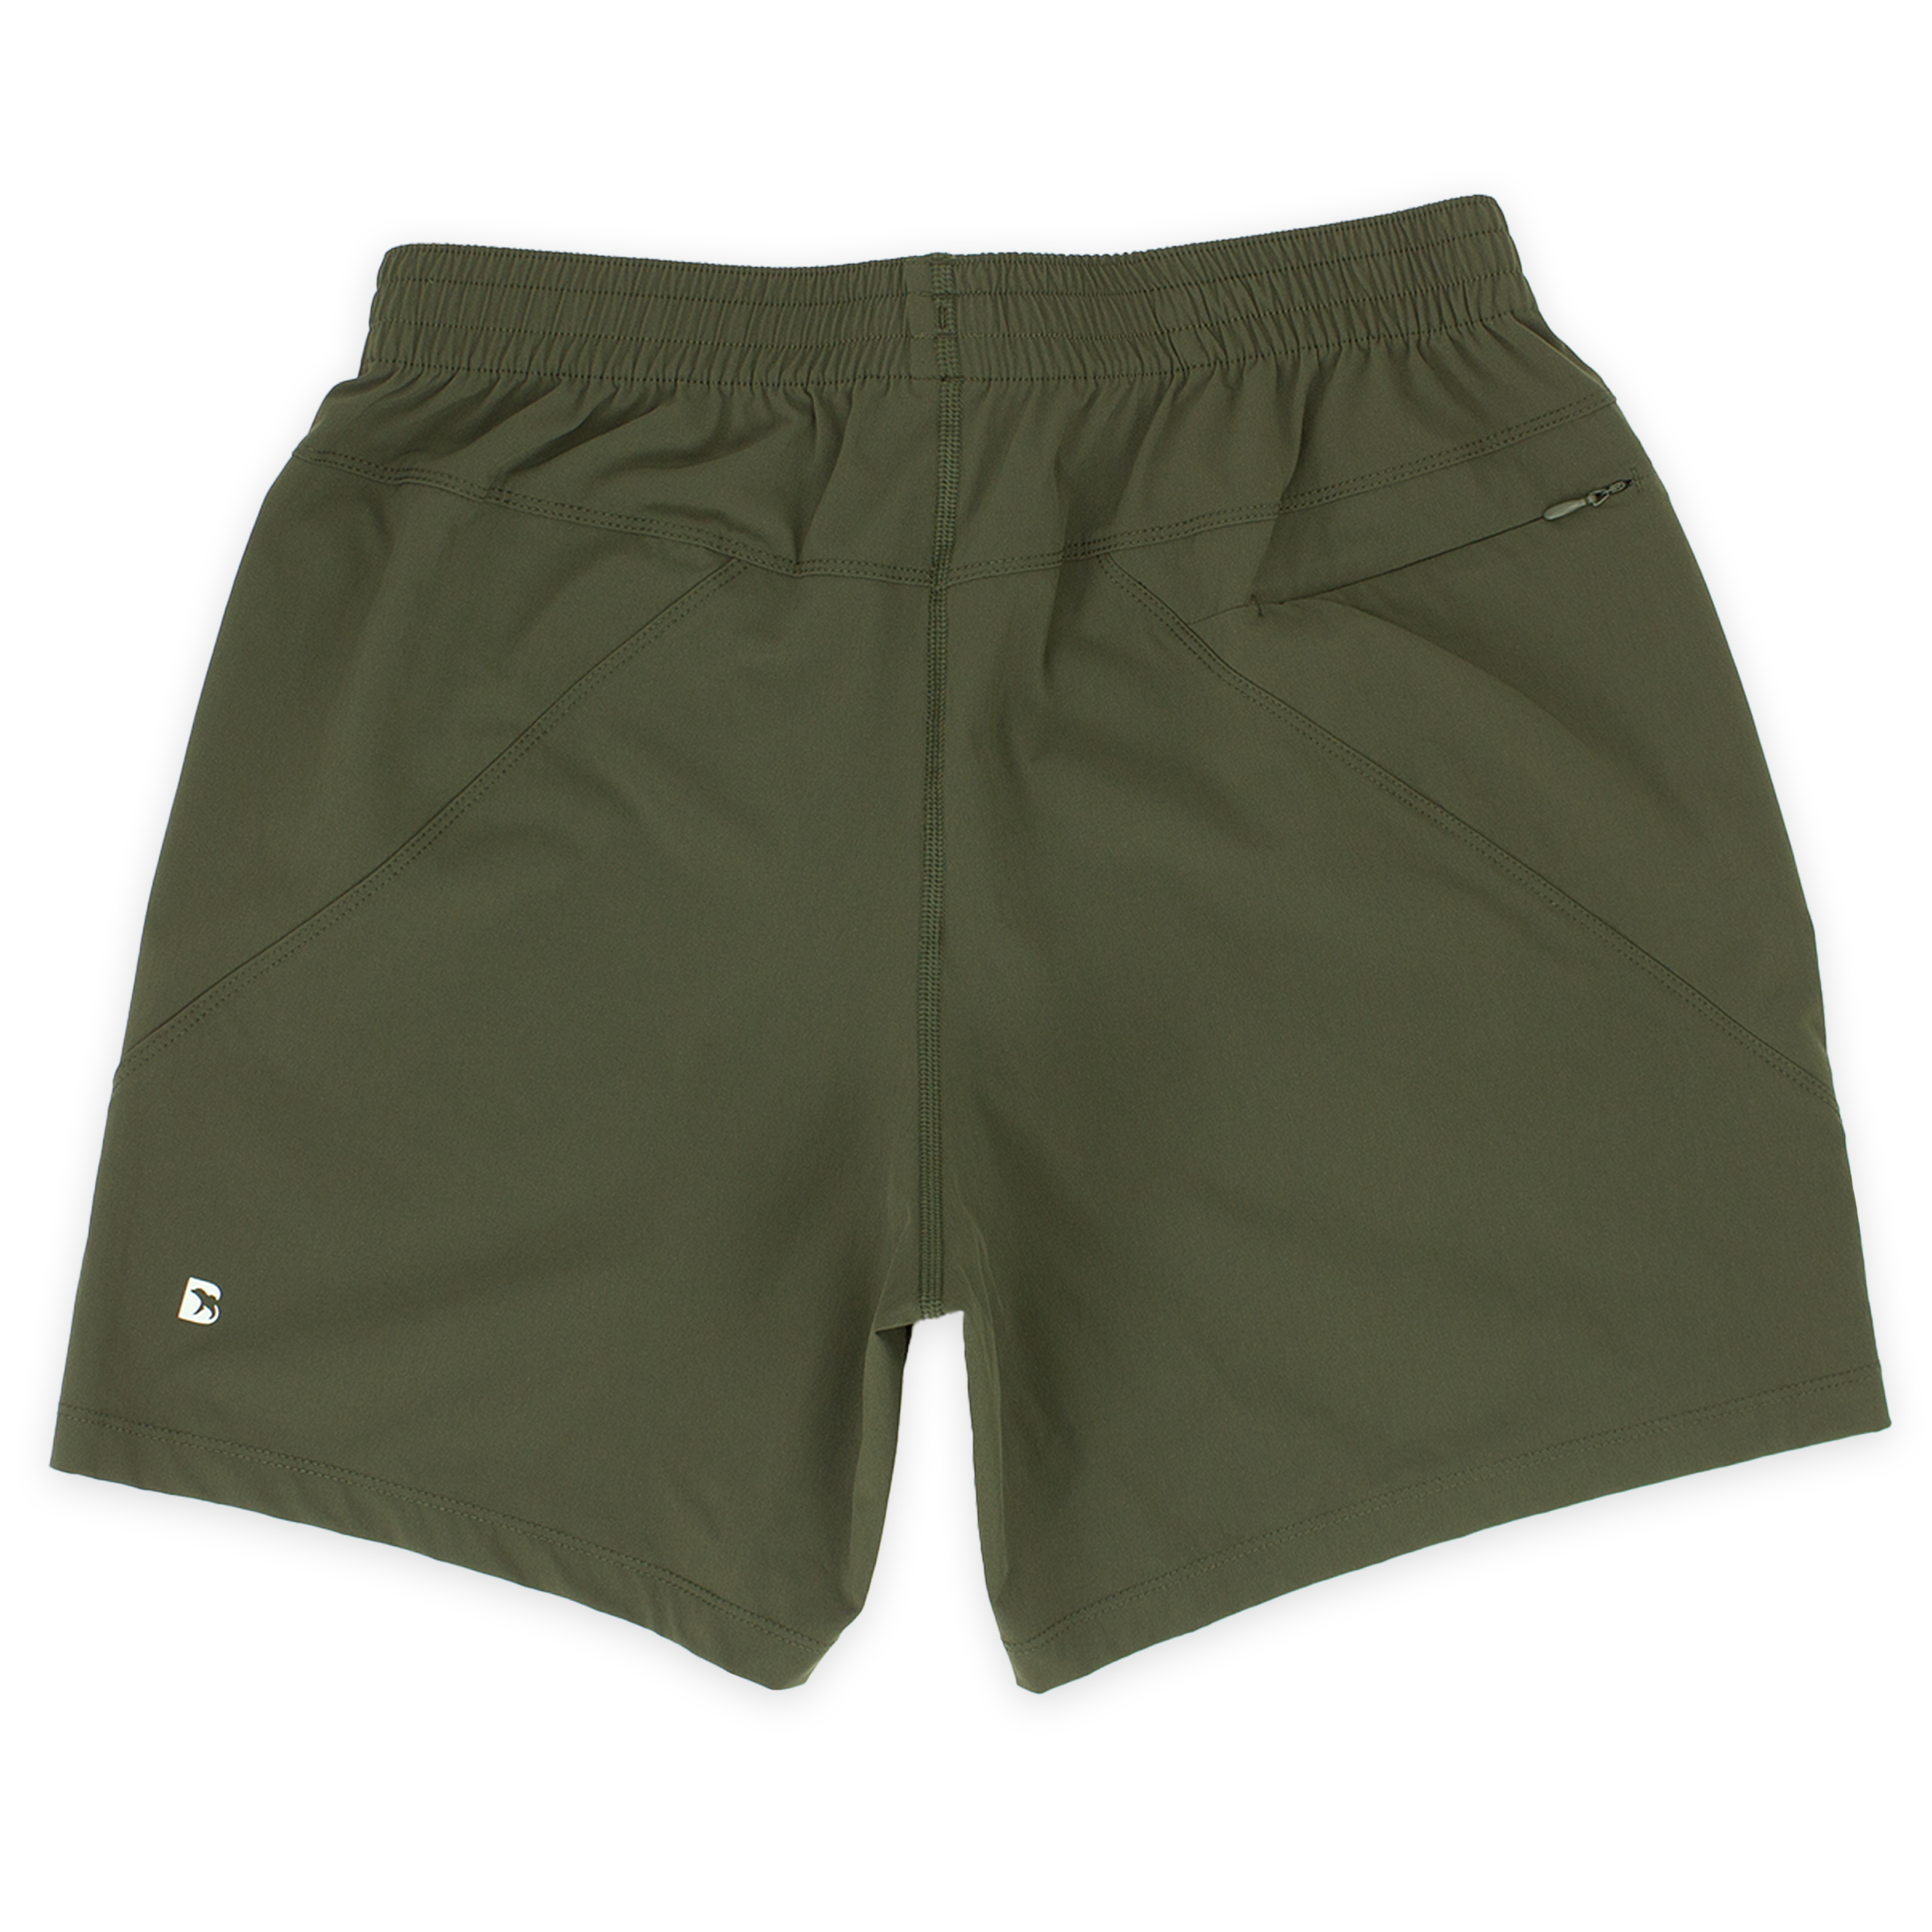 Atlas Short 5.5" Military Green Back with elastic waistband, back right zippered pocket, and small reflective logo of Bear drawn inside the letter B in bottom left corner